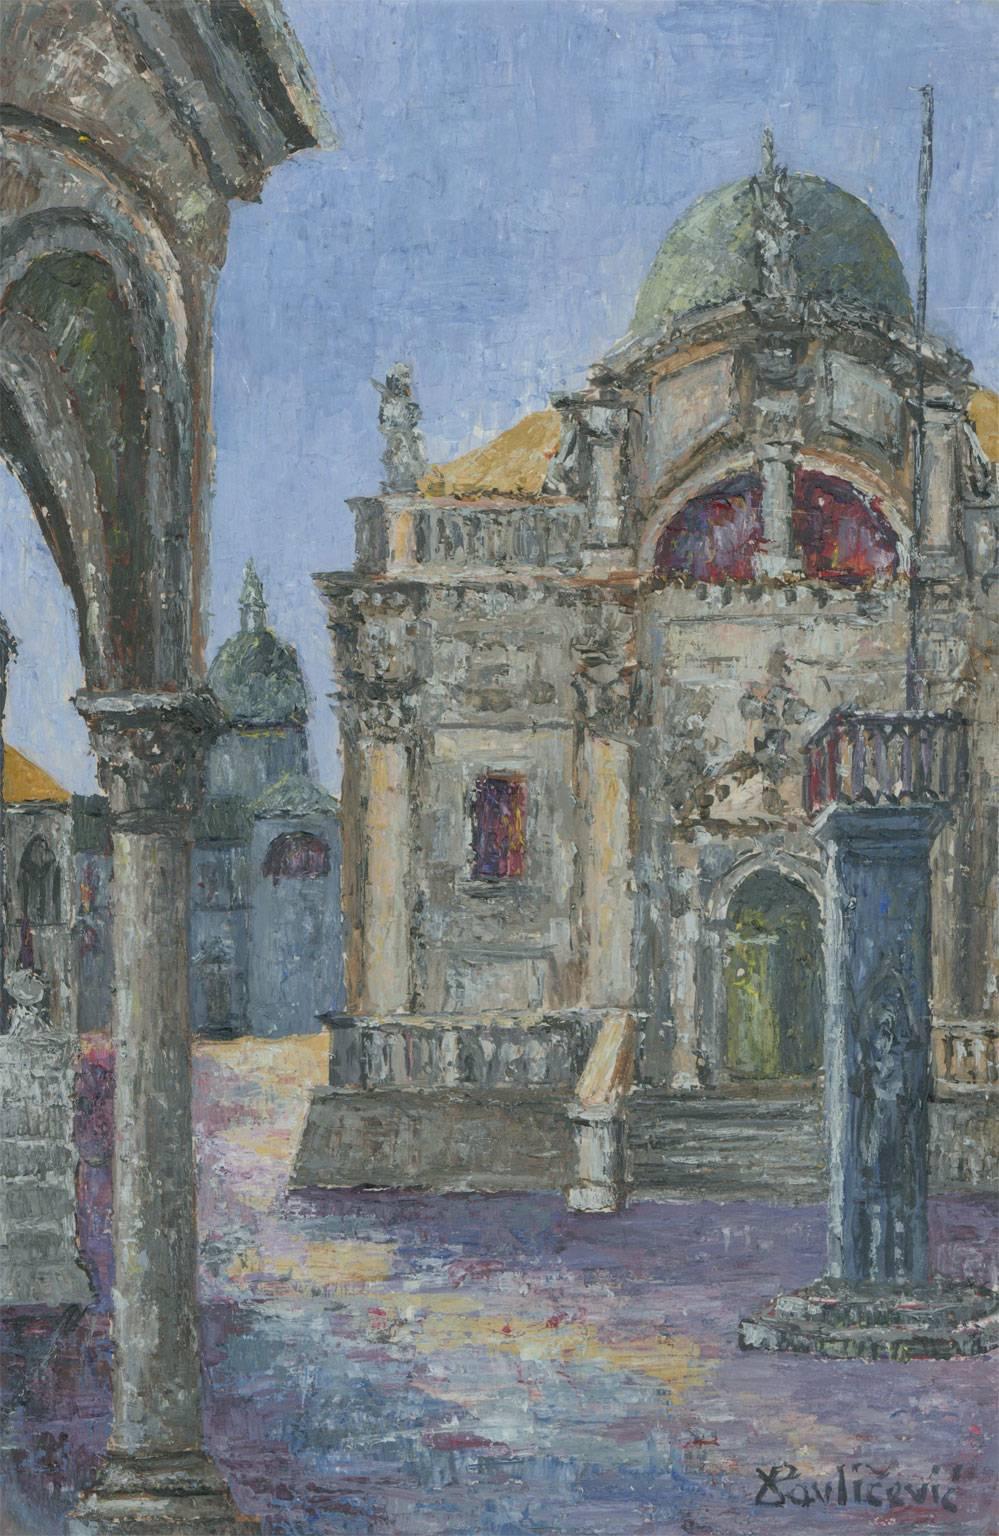 Pavlicevic - Croatian Contemporary Oil, View of a Church - Painting by Ante Pavlicevic